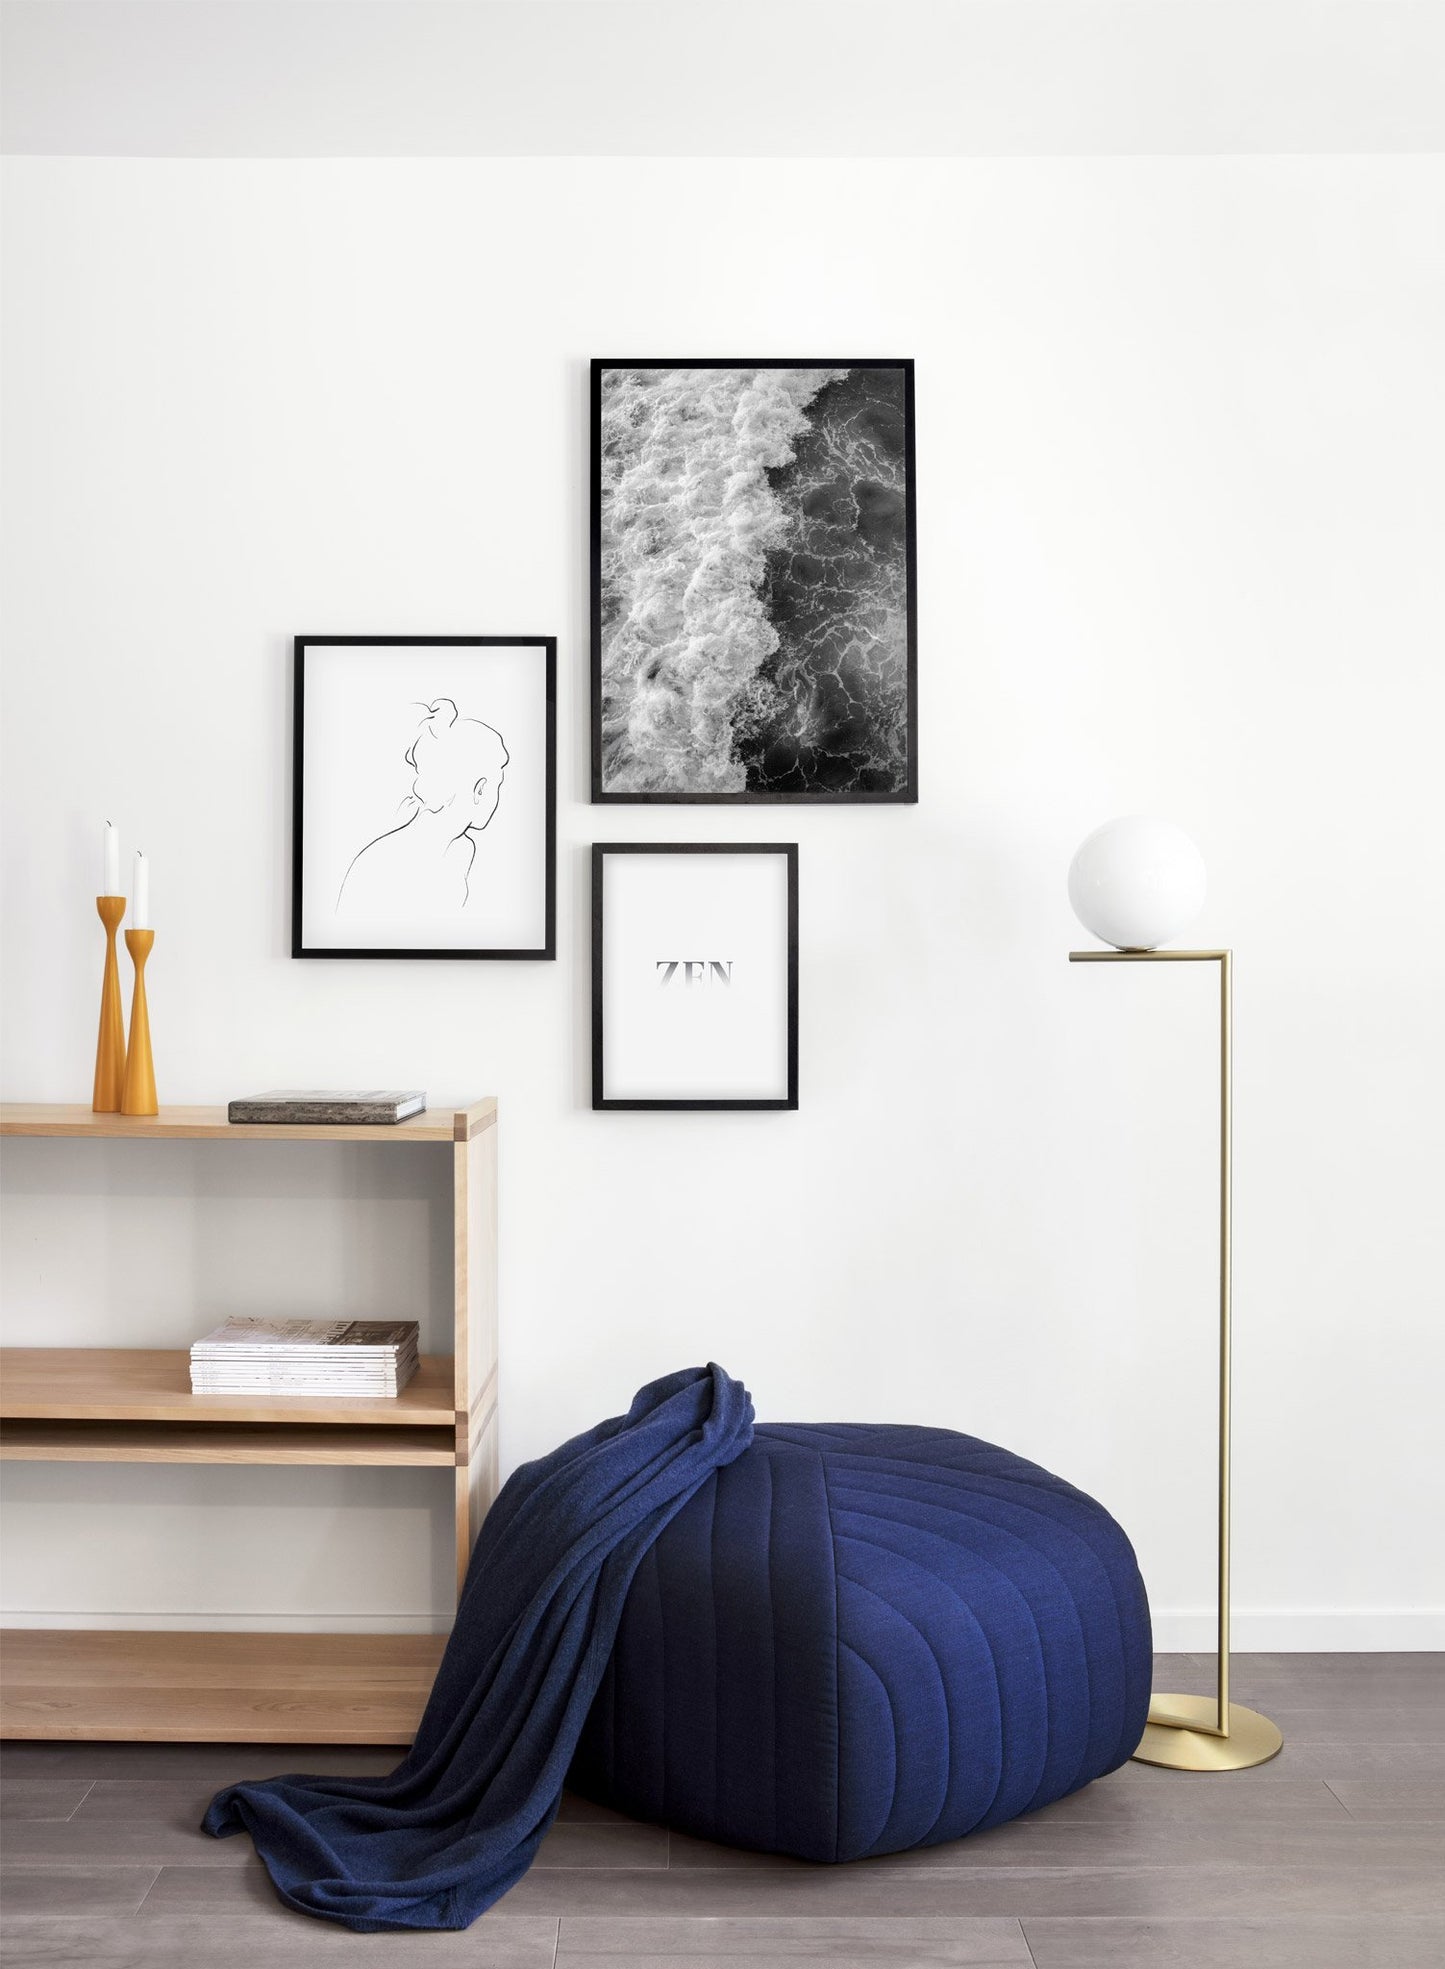 Modern minimalist poster by Opposite Wall with Emerald waters photography in black and white - Living room wall gallery trio